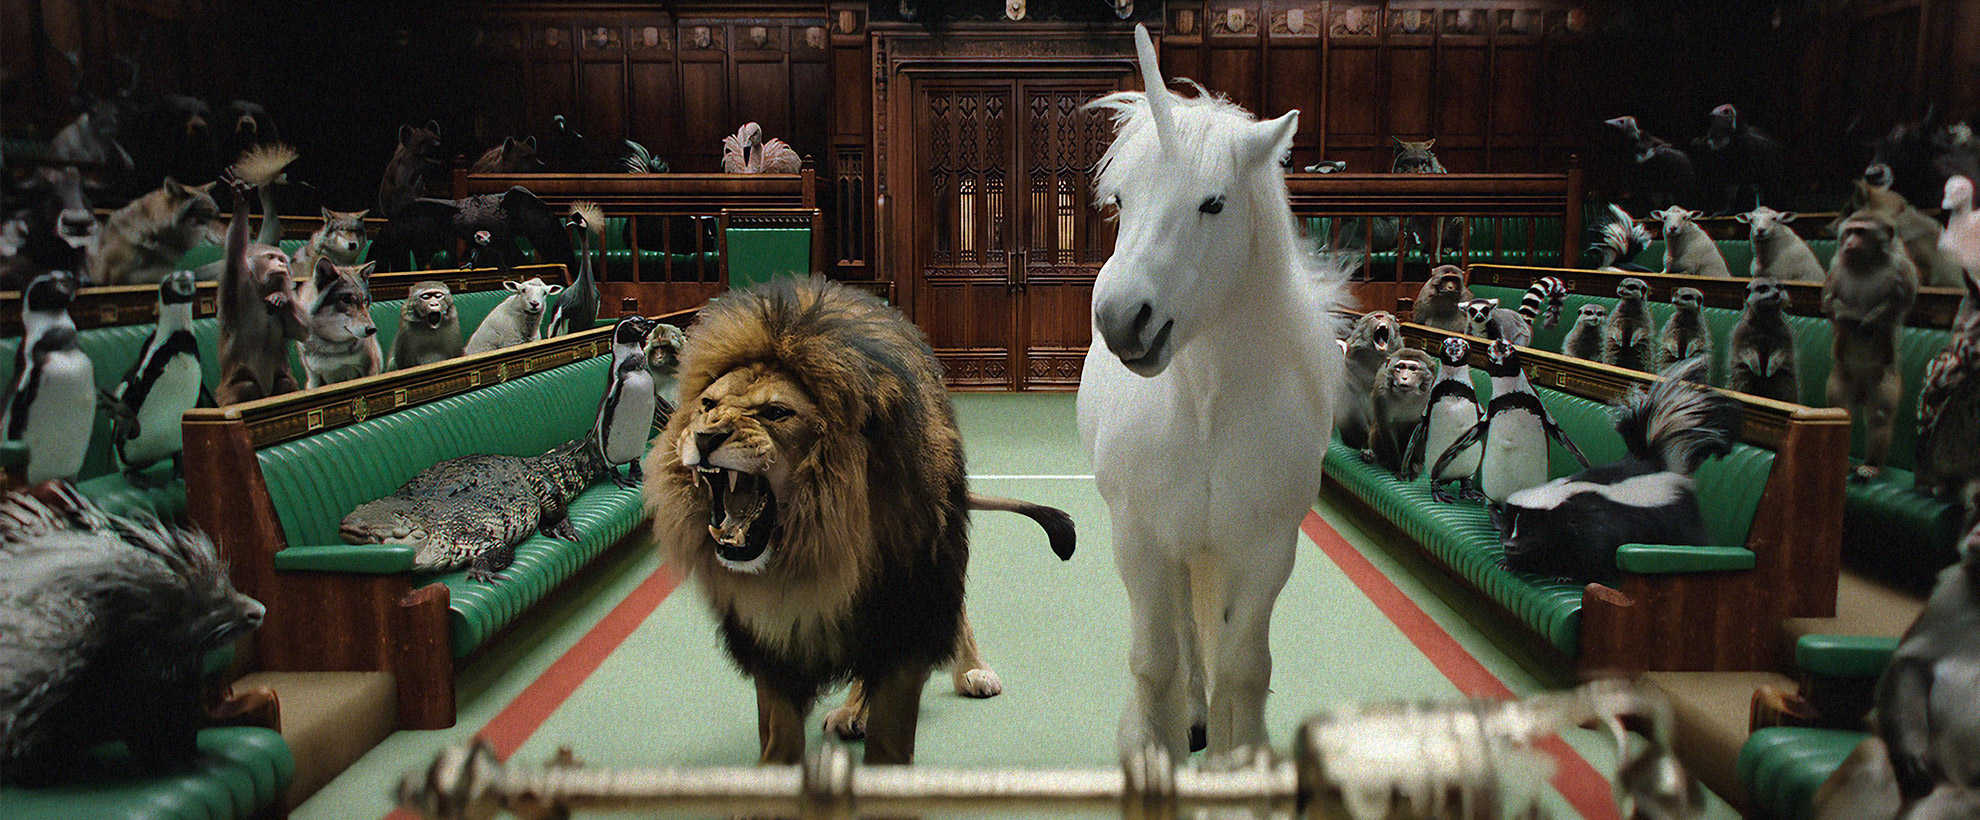 A lion and unicorn in the house of commons